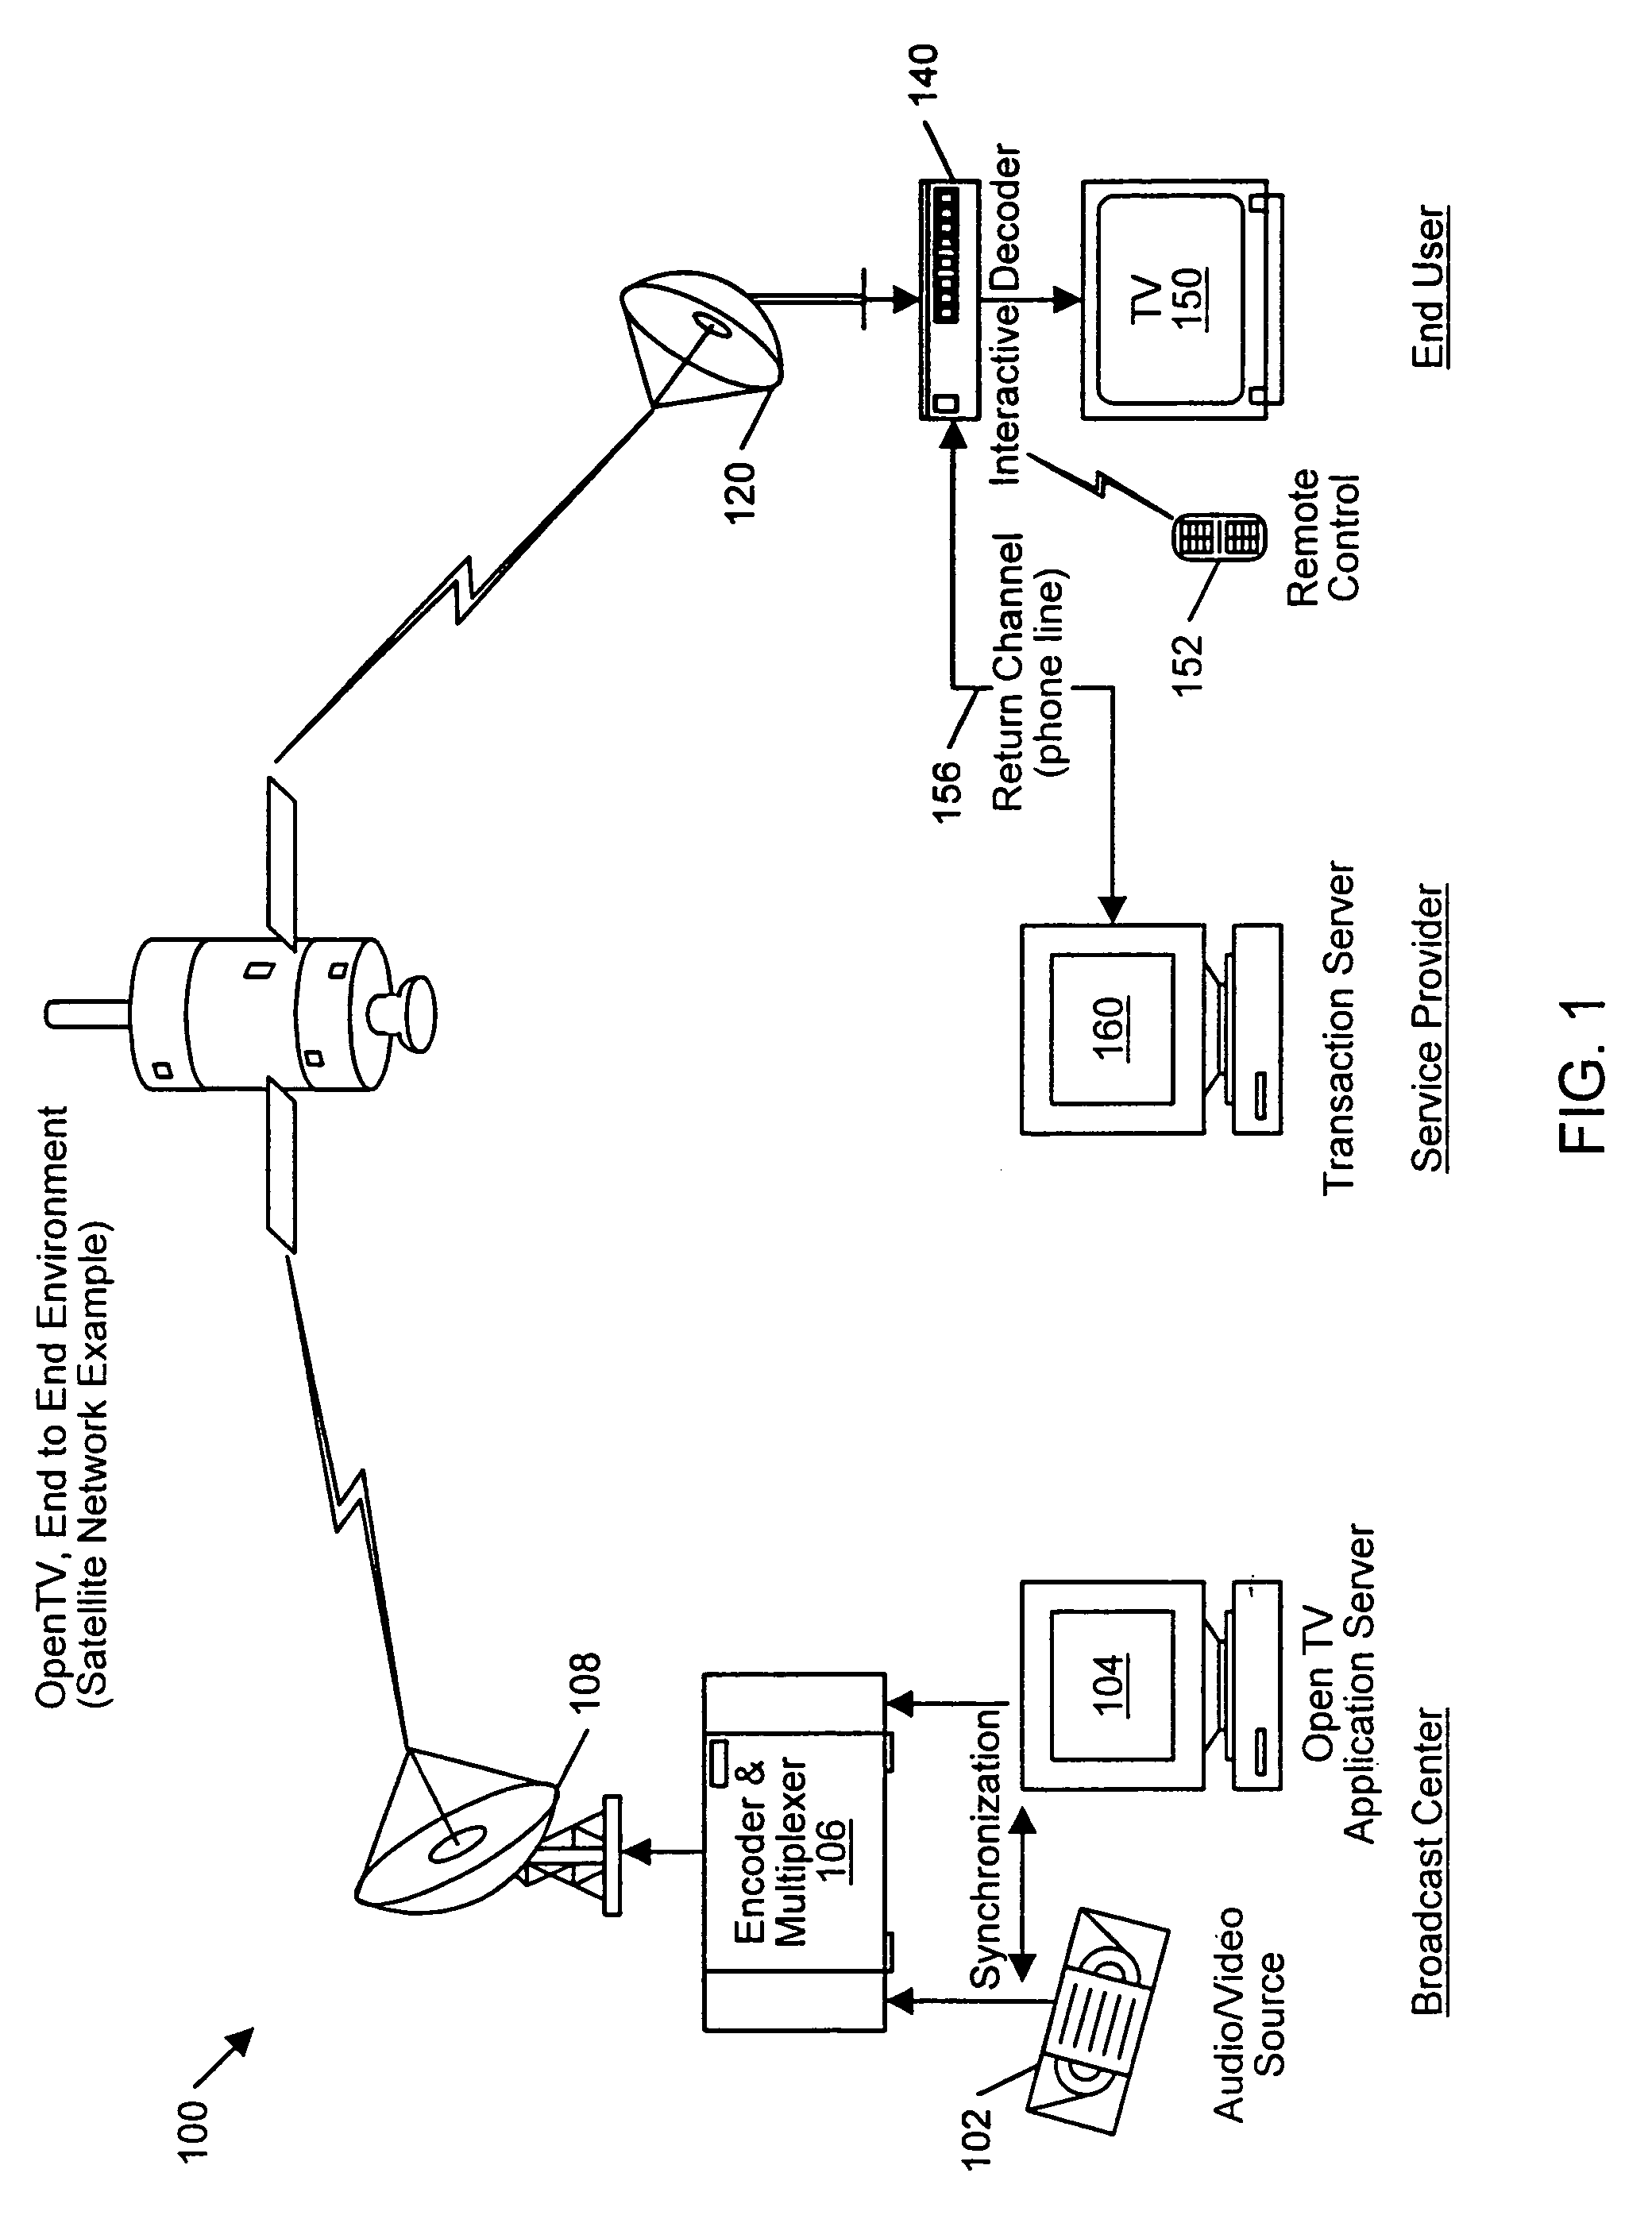 Interactive television system and method having on-demand web-like navigational capabilities for displaying requested hyperlinked web-like still images associated with television content